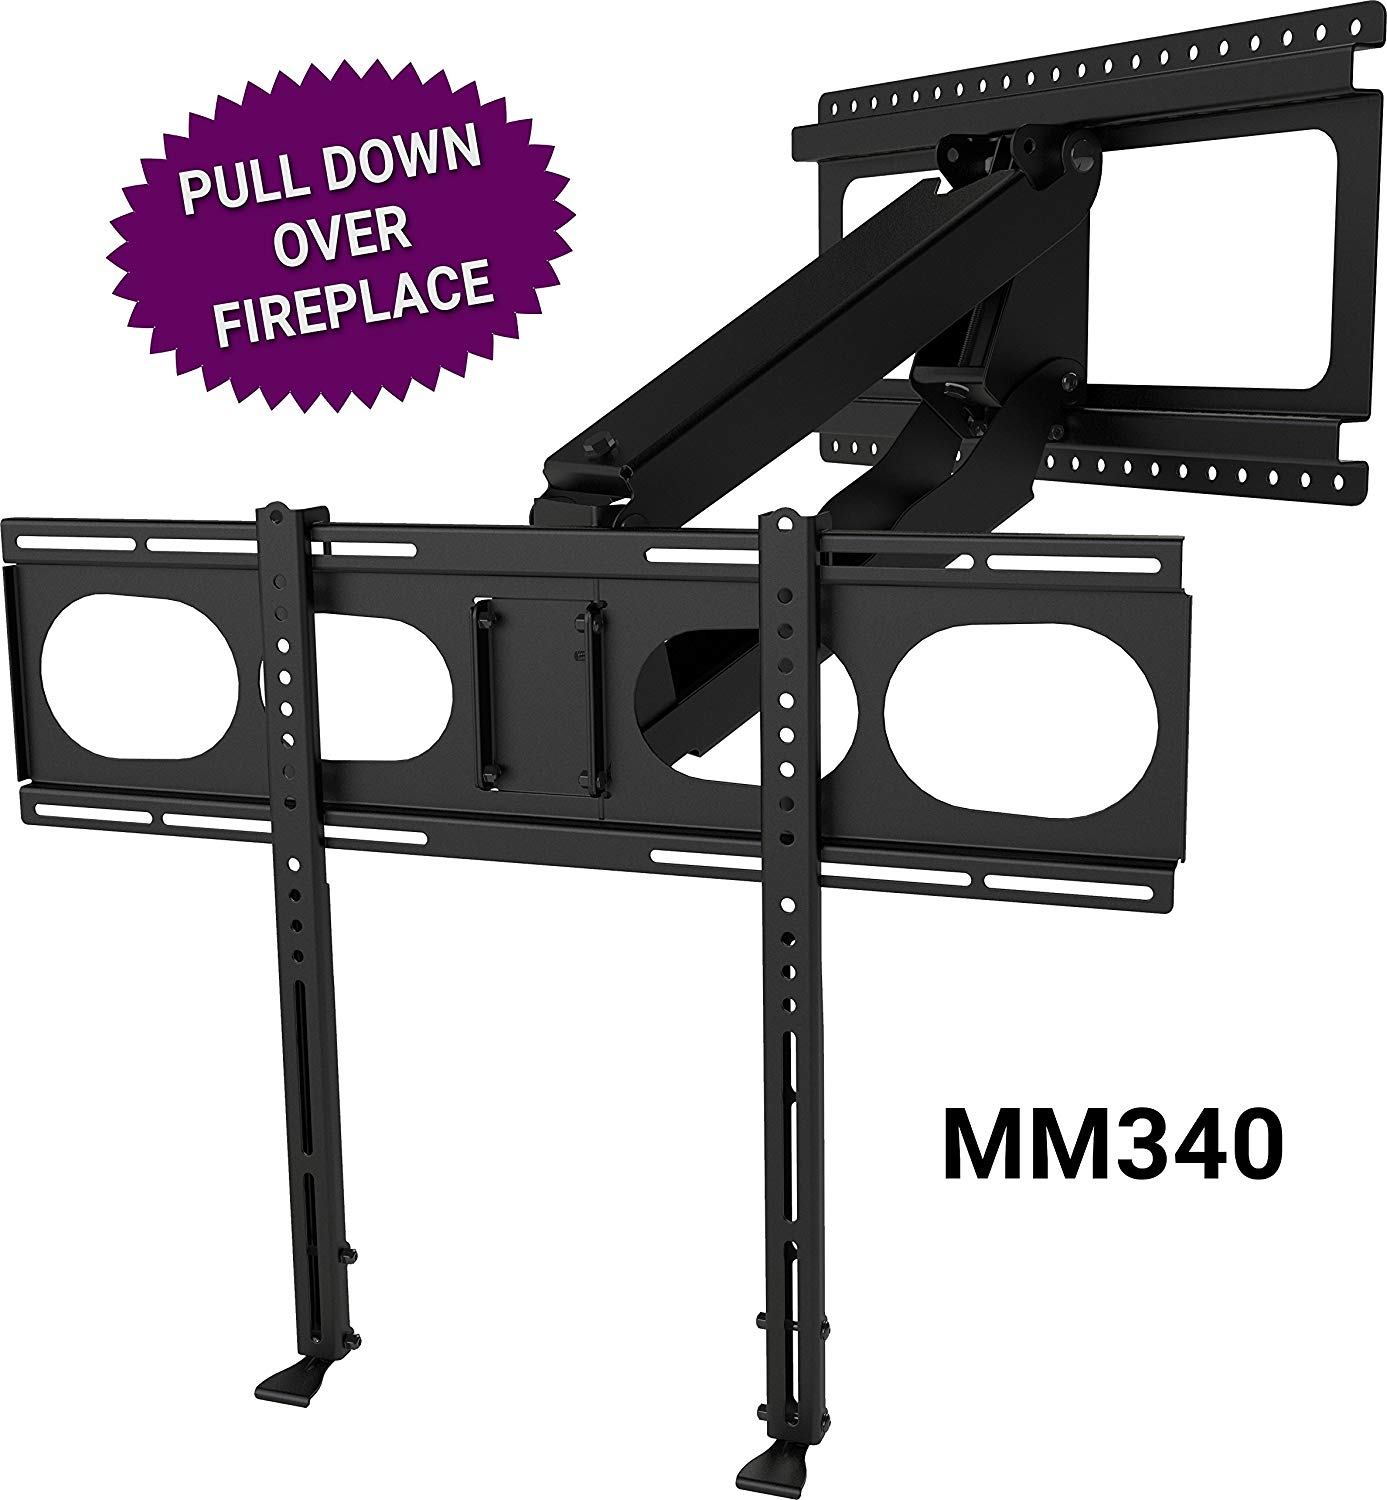 Tv Above Fireplace too High Lovely Mantelmount Mm340 Fireplace Pull Down Tv Mount